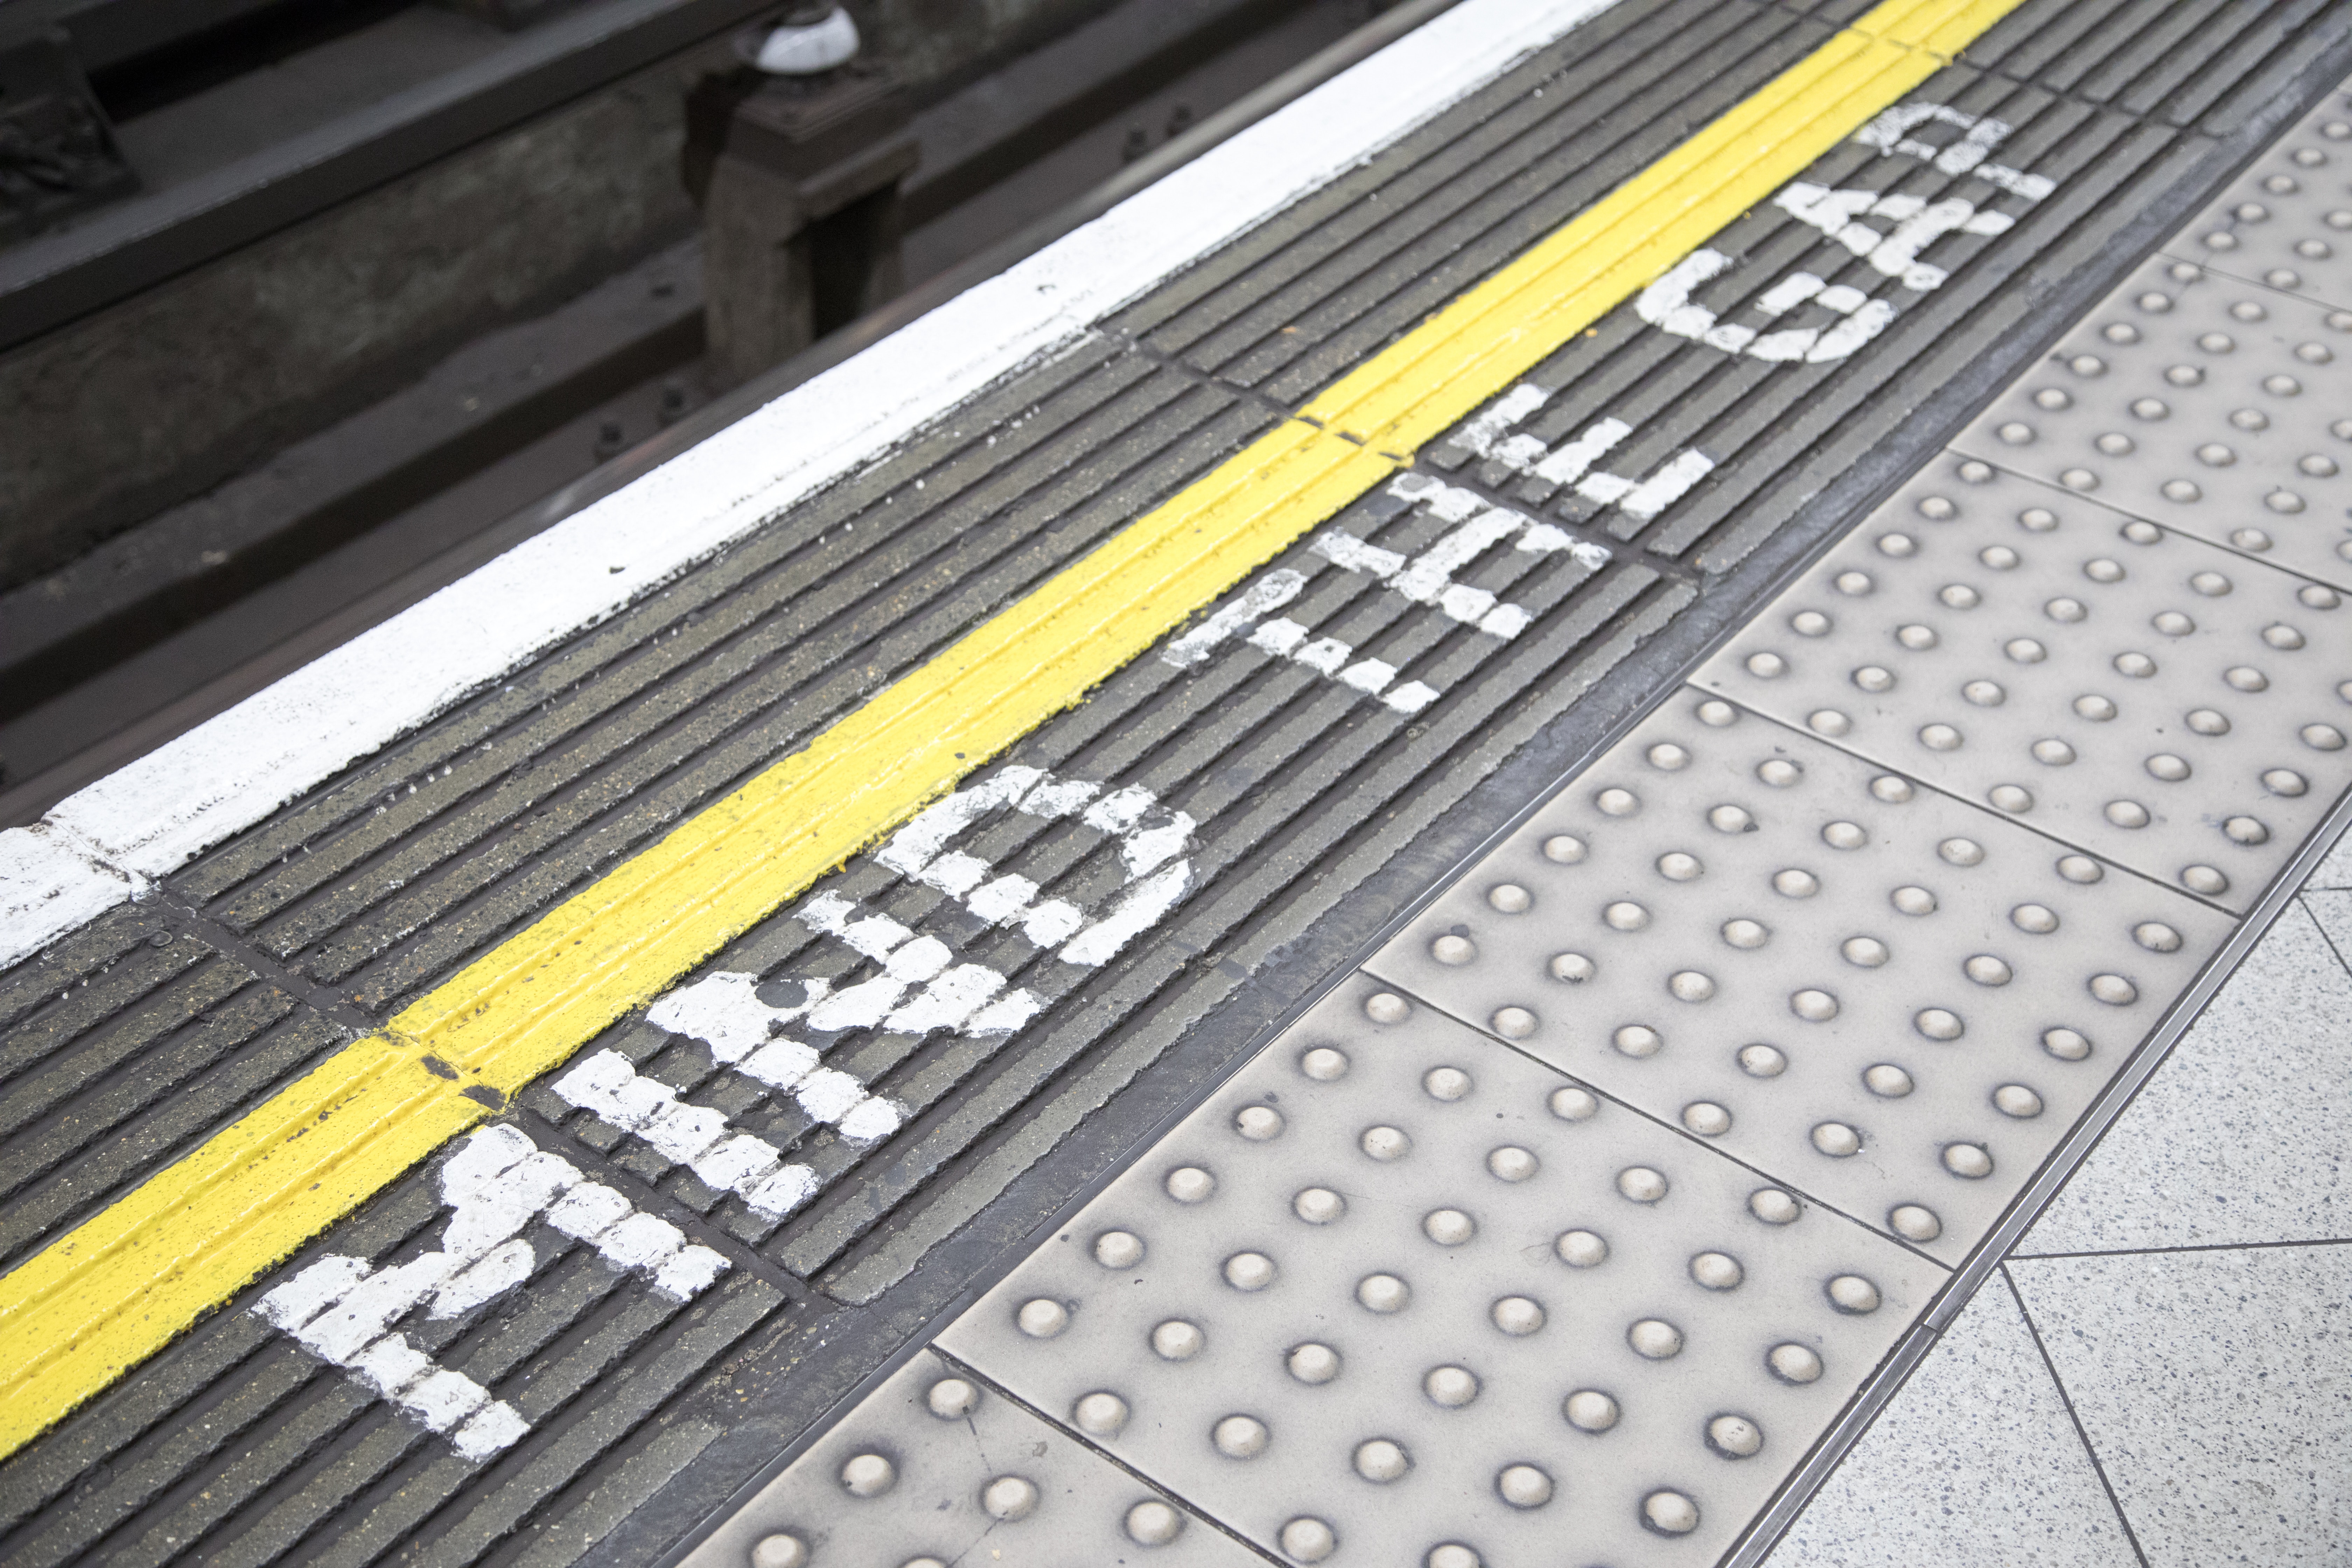 Close up of 'mind the gap' marking along the edge of a train platform